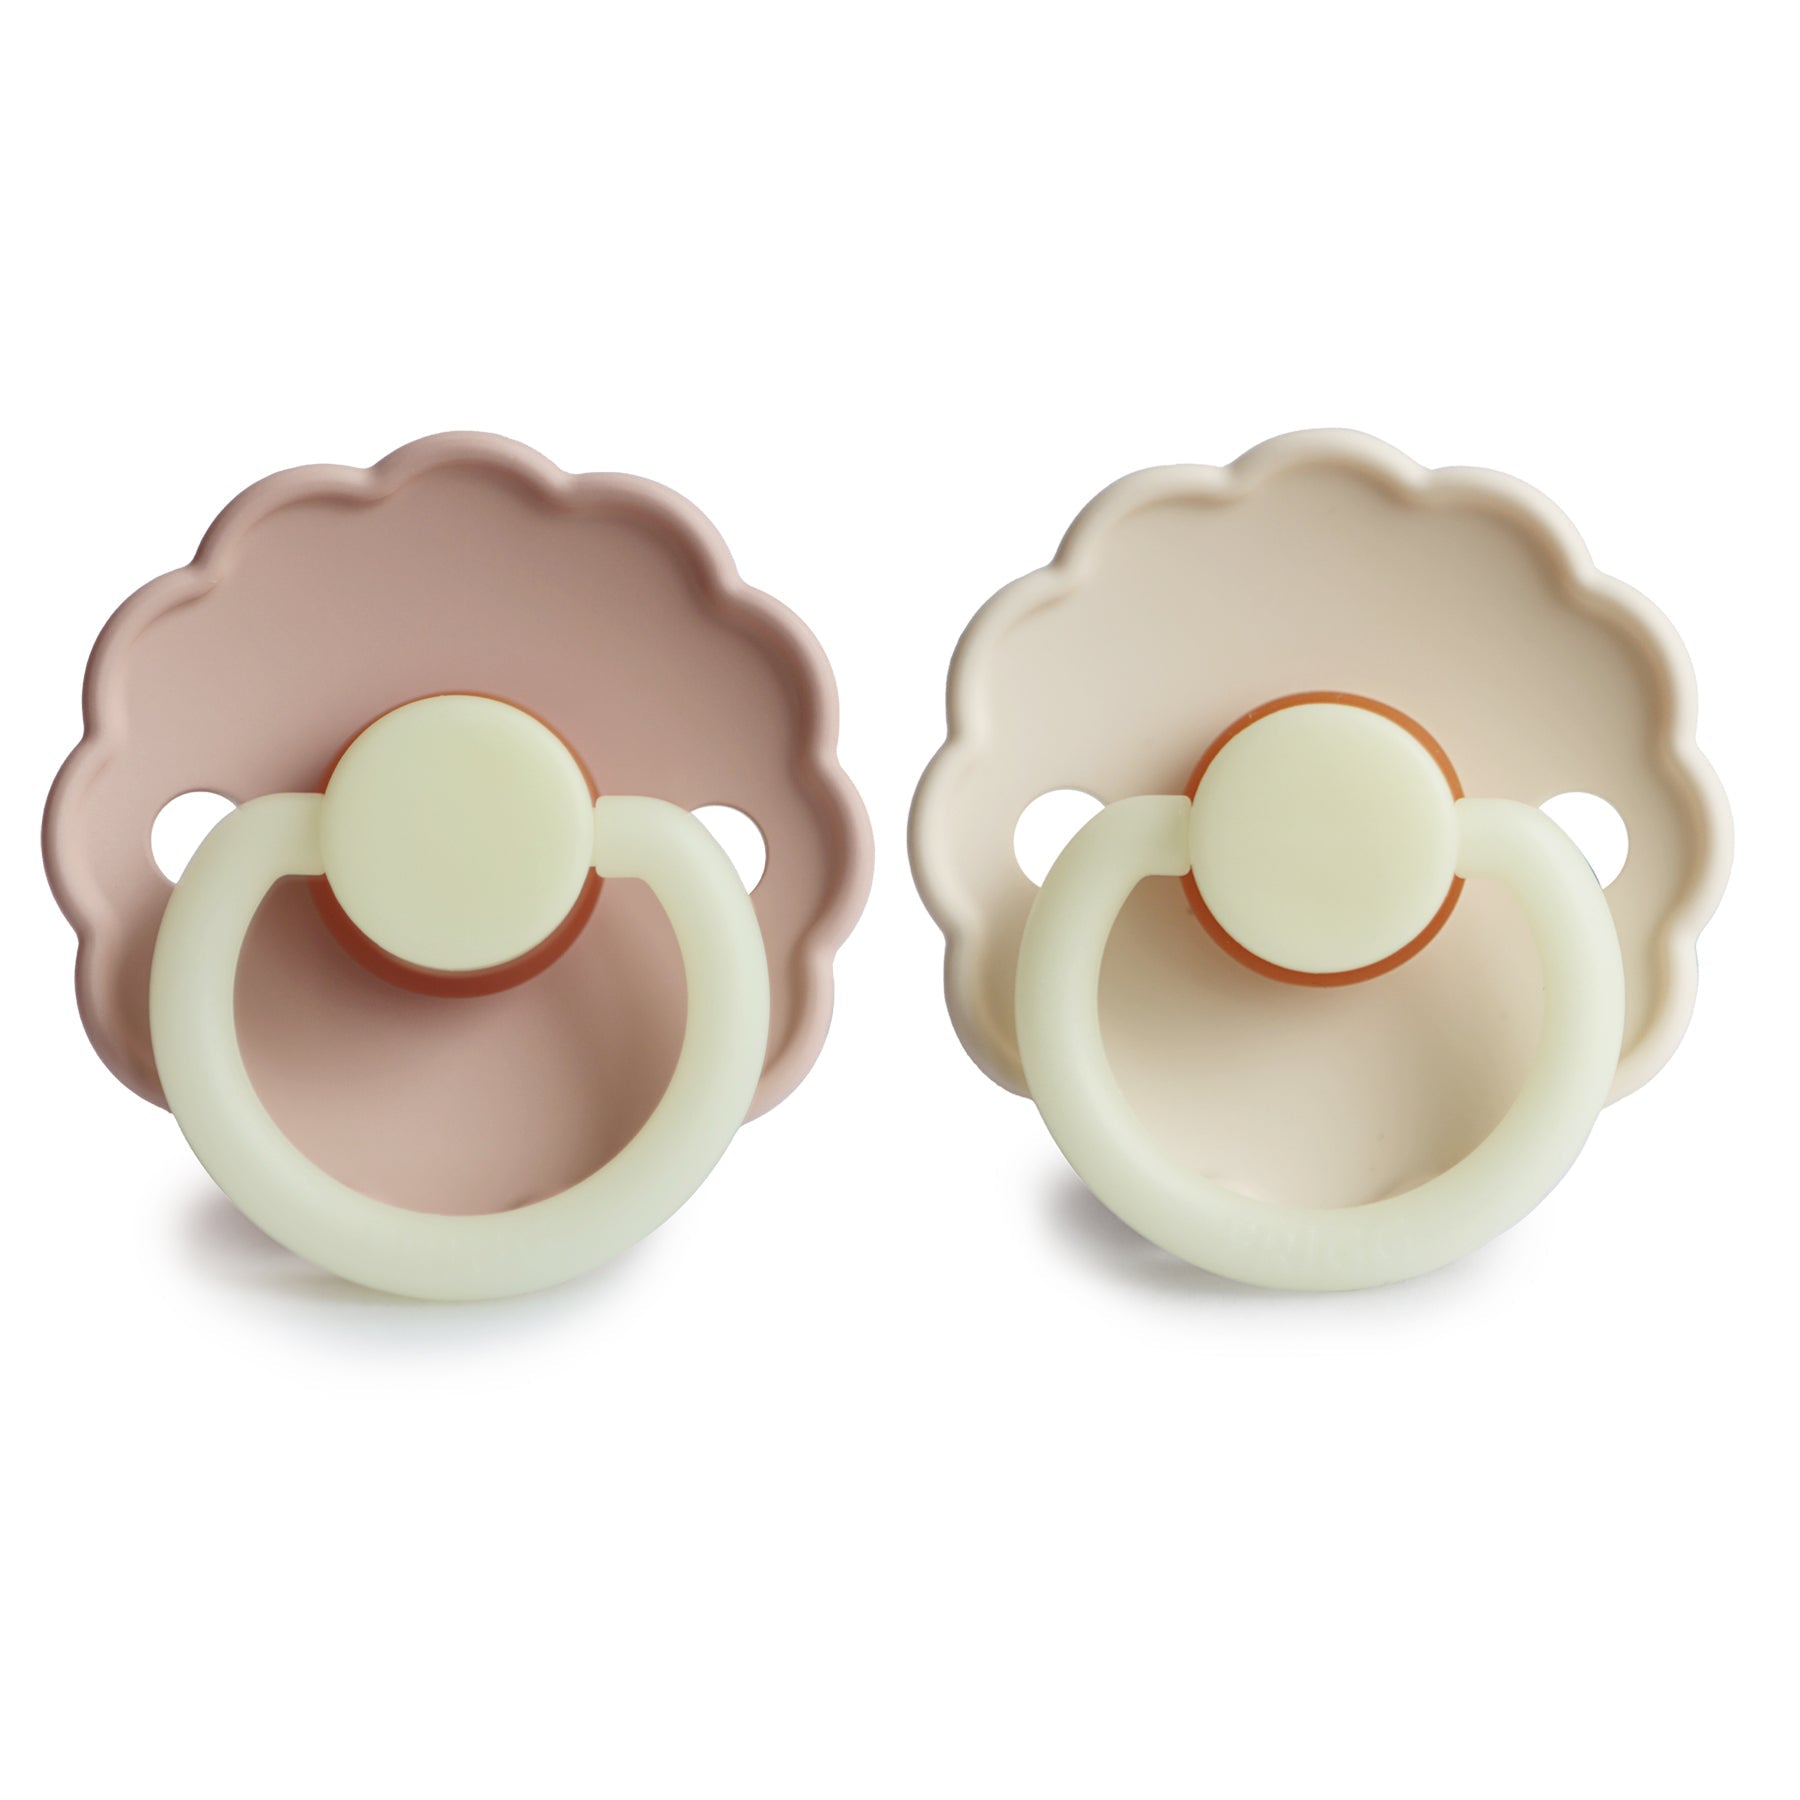 Night Pacifier Blush and Cream by FRIGG